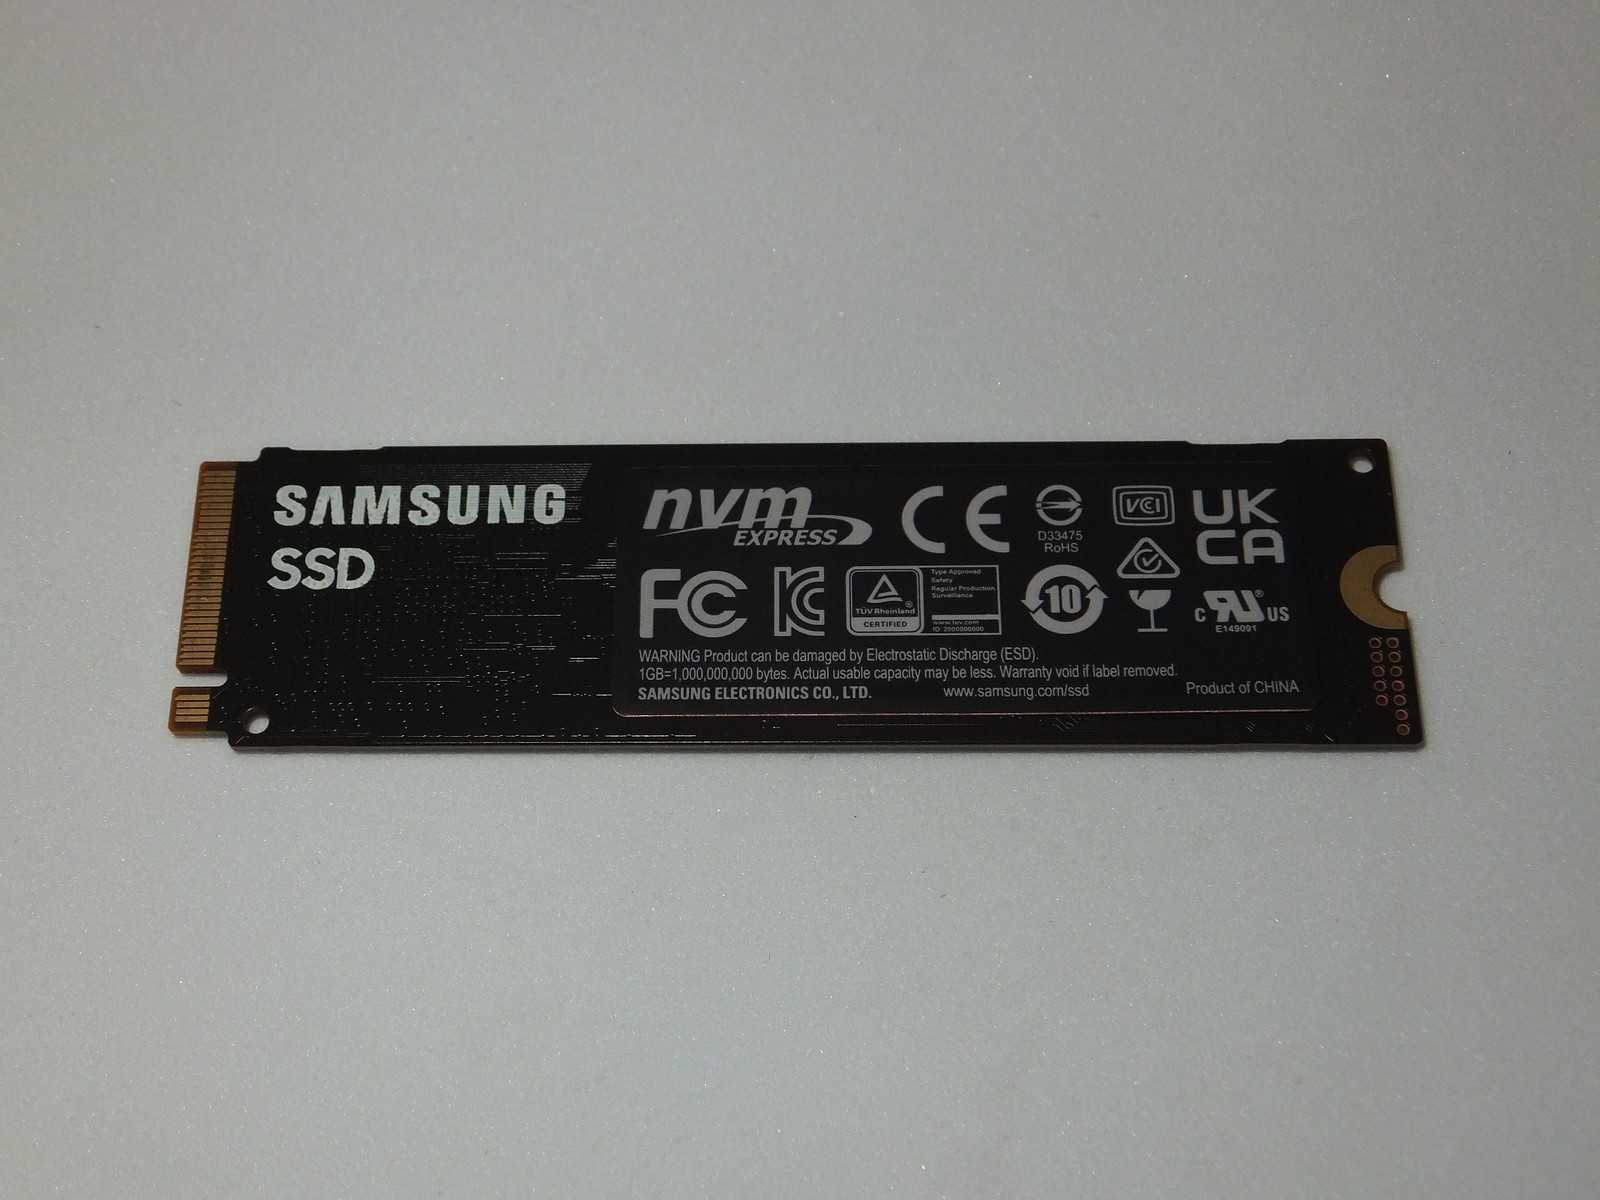 Samsung 980 nvme ssd review | pcworld